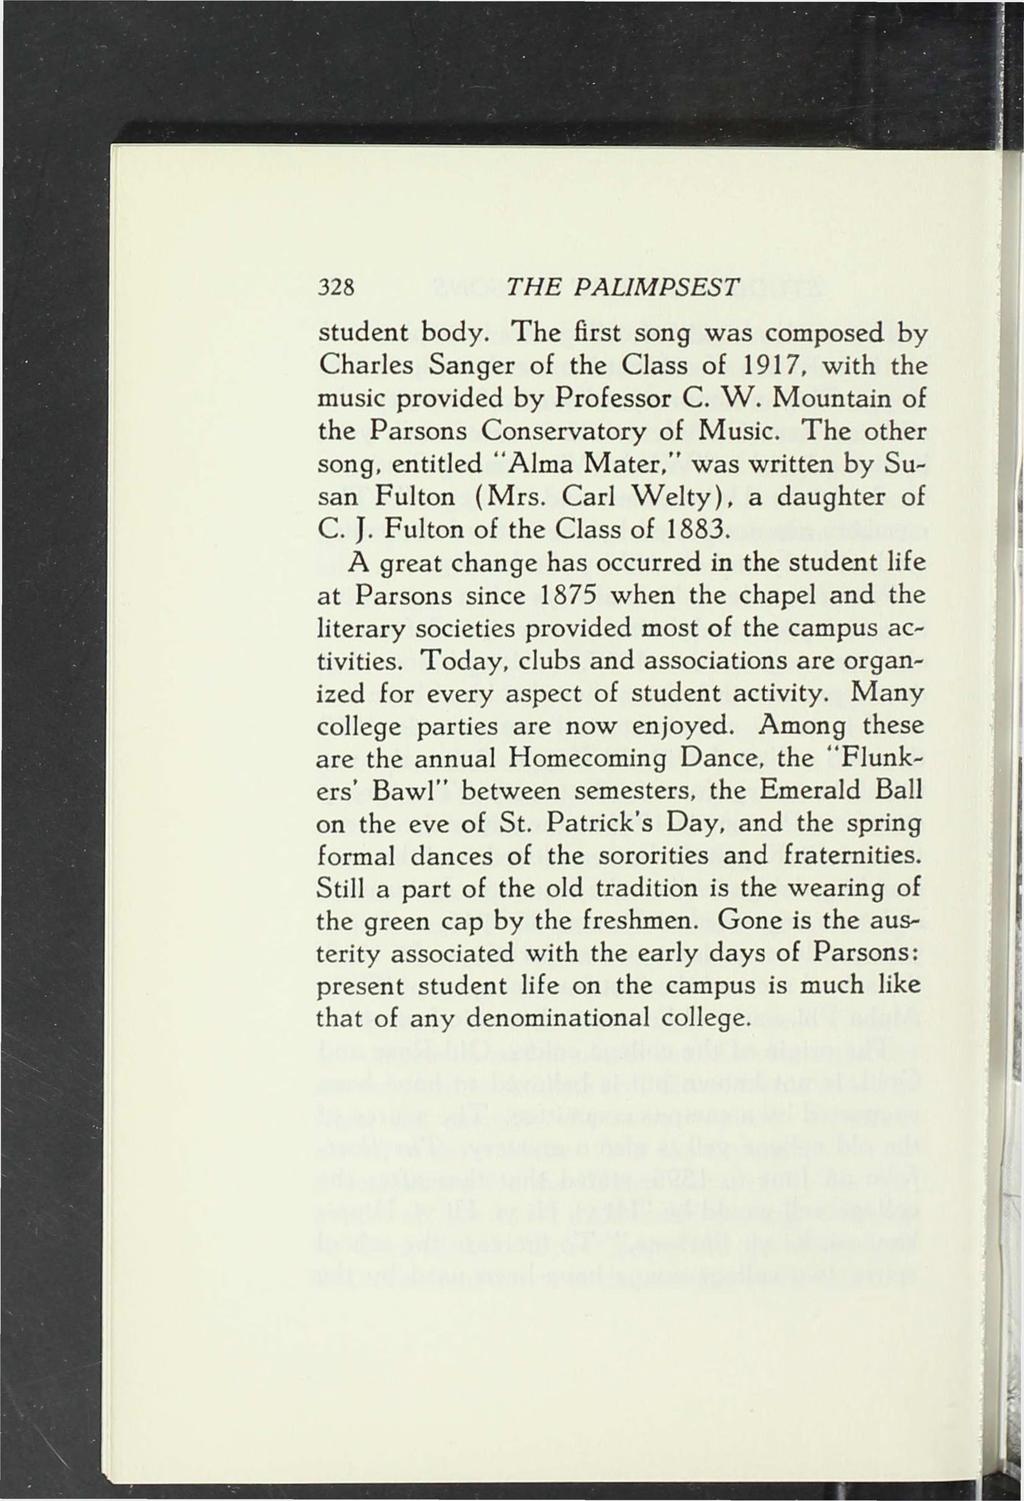 328 THE PALIMPSEST student body. The first song was composed by Charles Sanger of the Class of 1917, with the music provided by Professor C. W. Mountain of the Parsons Conservatory of Music.